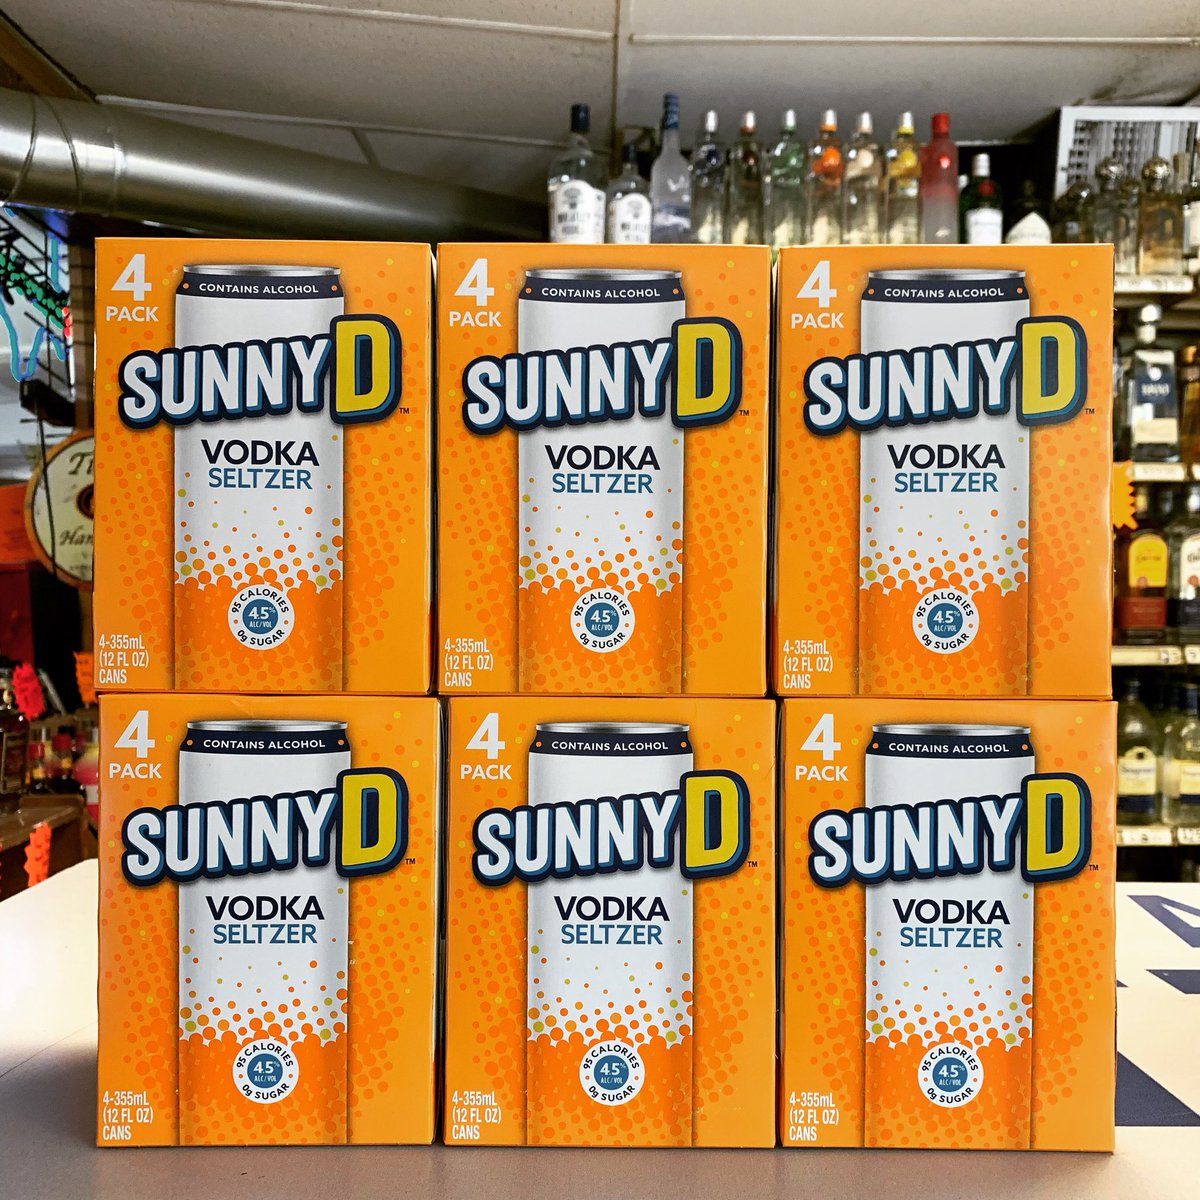 Price-$10.49 (4 Pack)

We have SunnyD Vodka Seltzers Back In Stock!!! Stop in on this beautiful today to stock up before we run out again.

#vodka #vodkadrinks #vodkaseltzer #sunnydseltzer #lexingtonky #ky #kentucky #hardseltzers #summertime